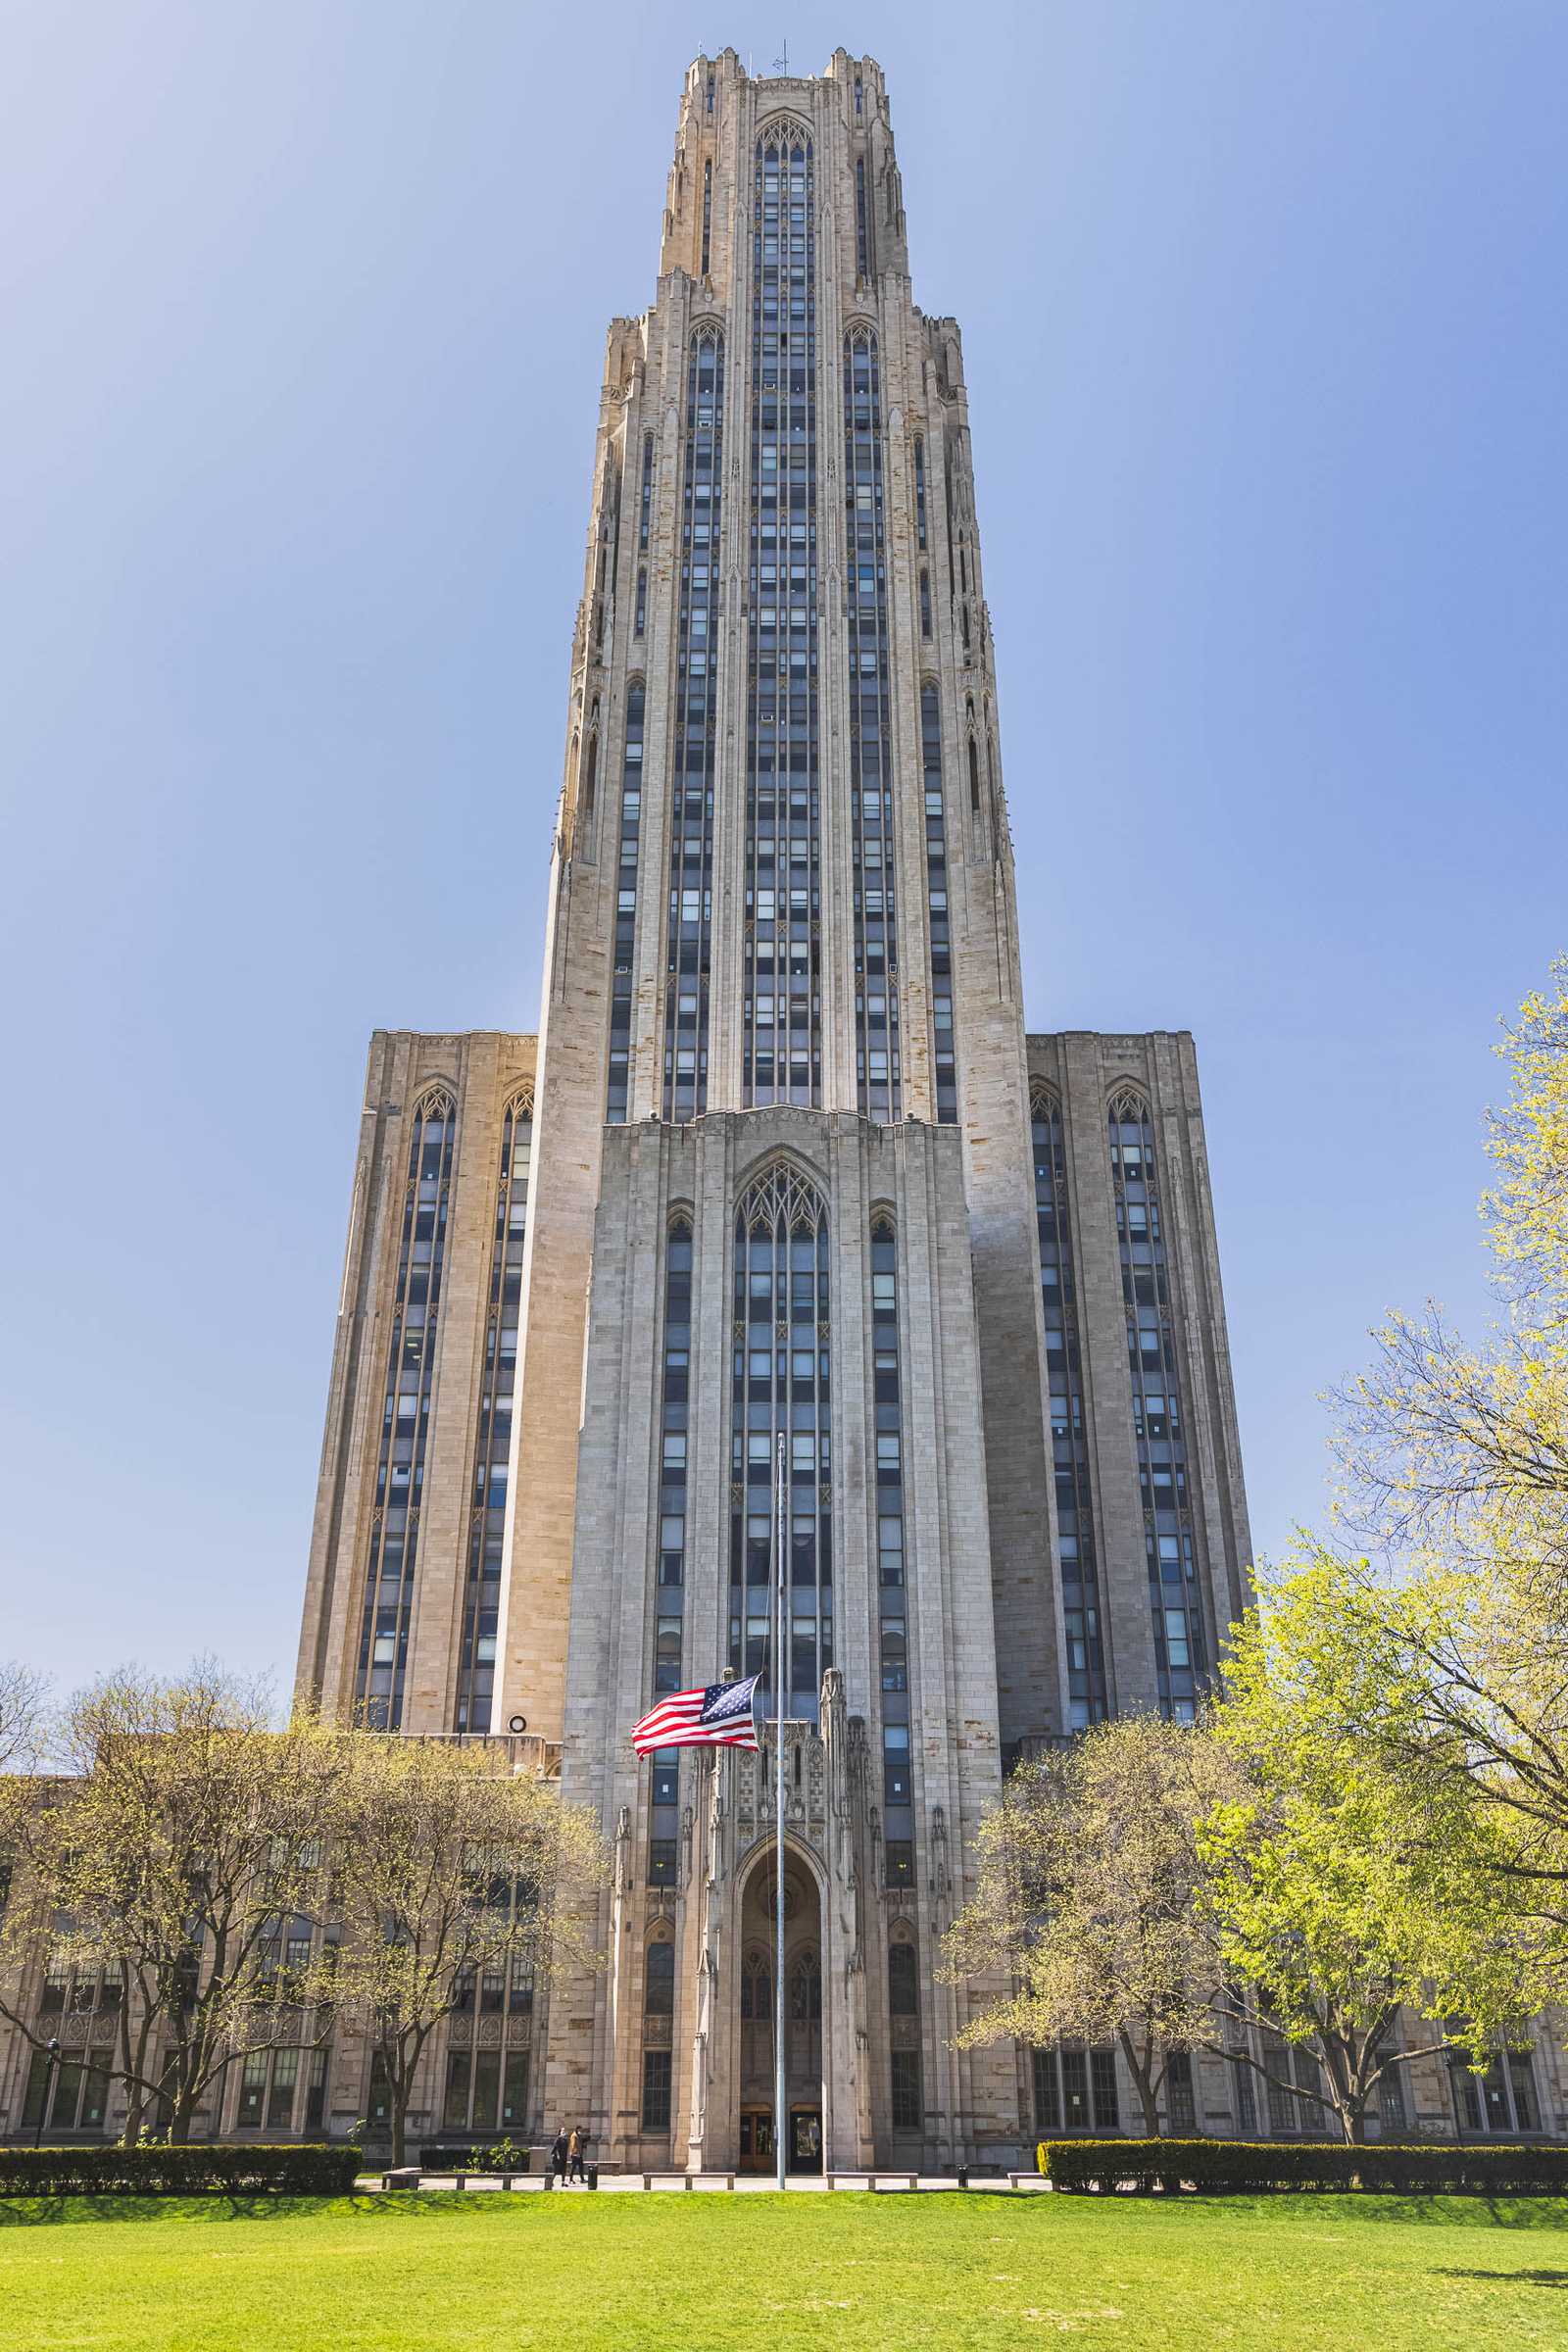 The University of Pittsburgh's Cathedral of Learning